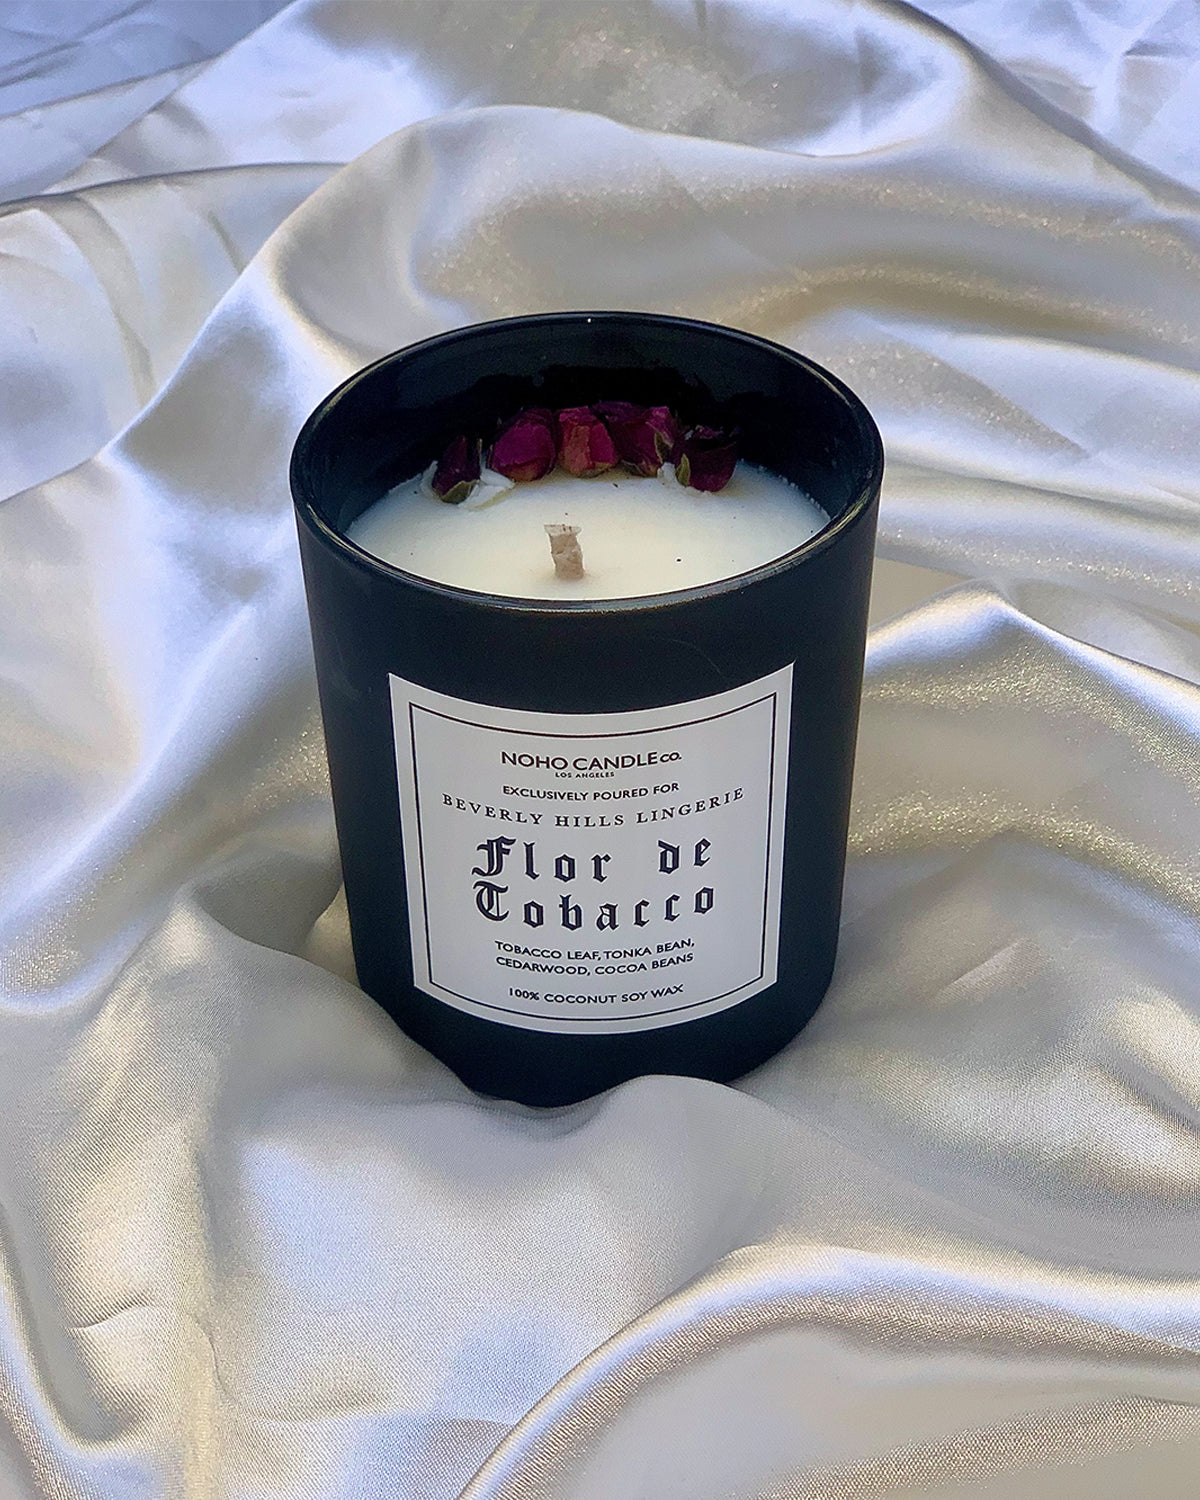 Flor de Tobacco Handmade Sustainable Candle